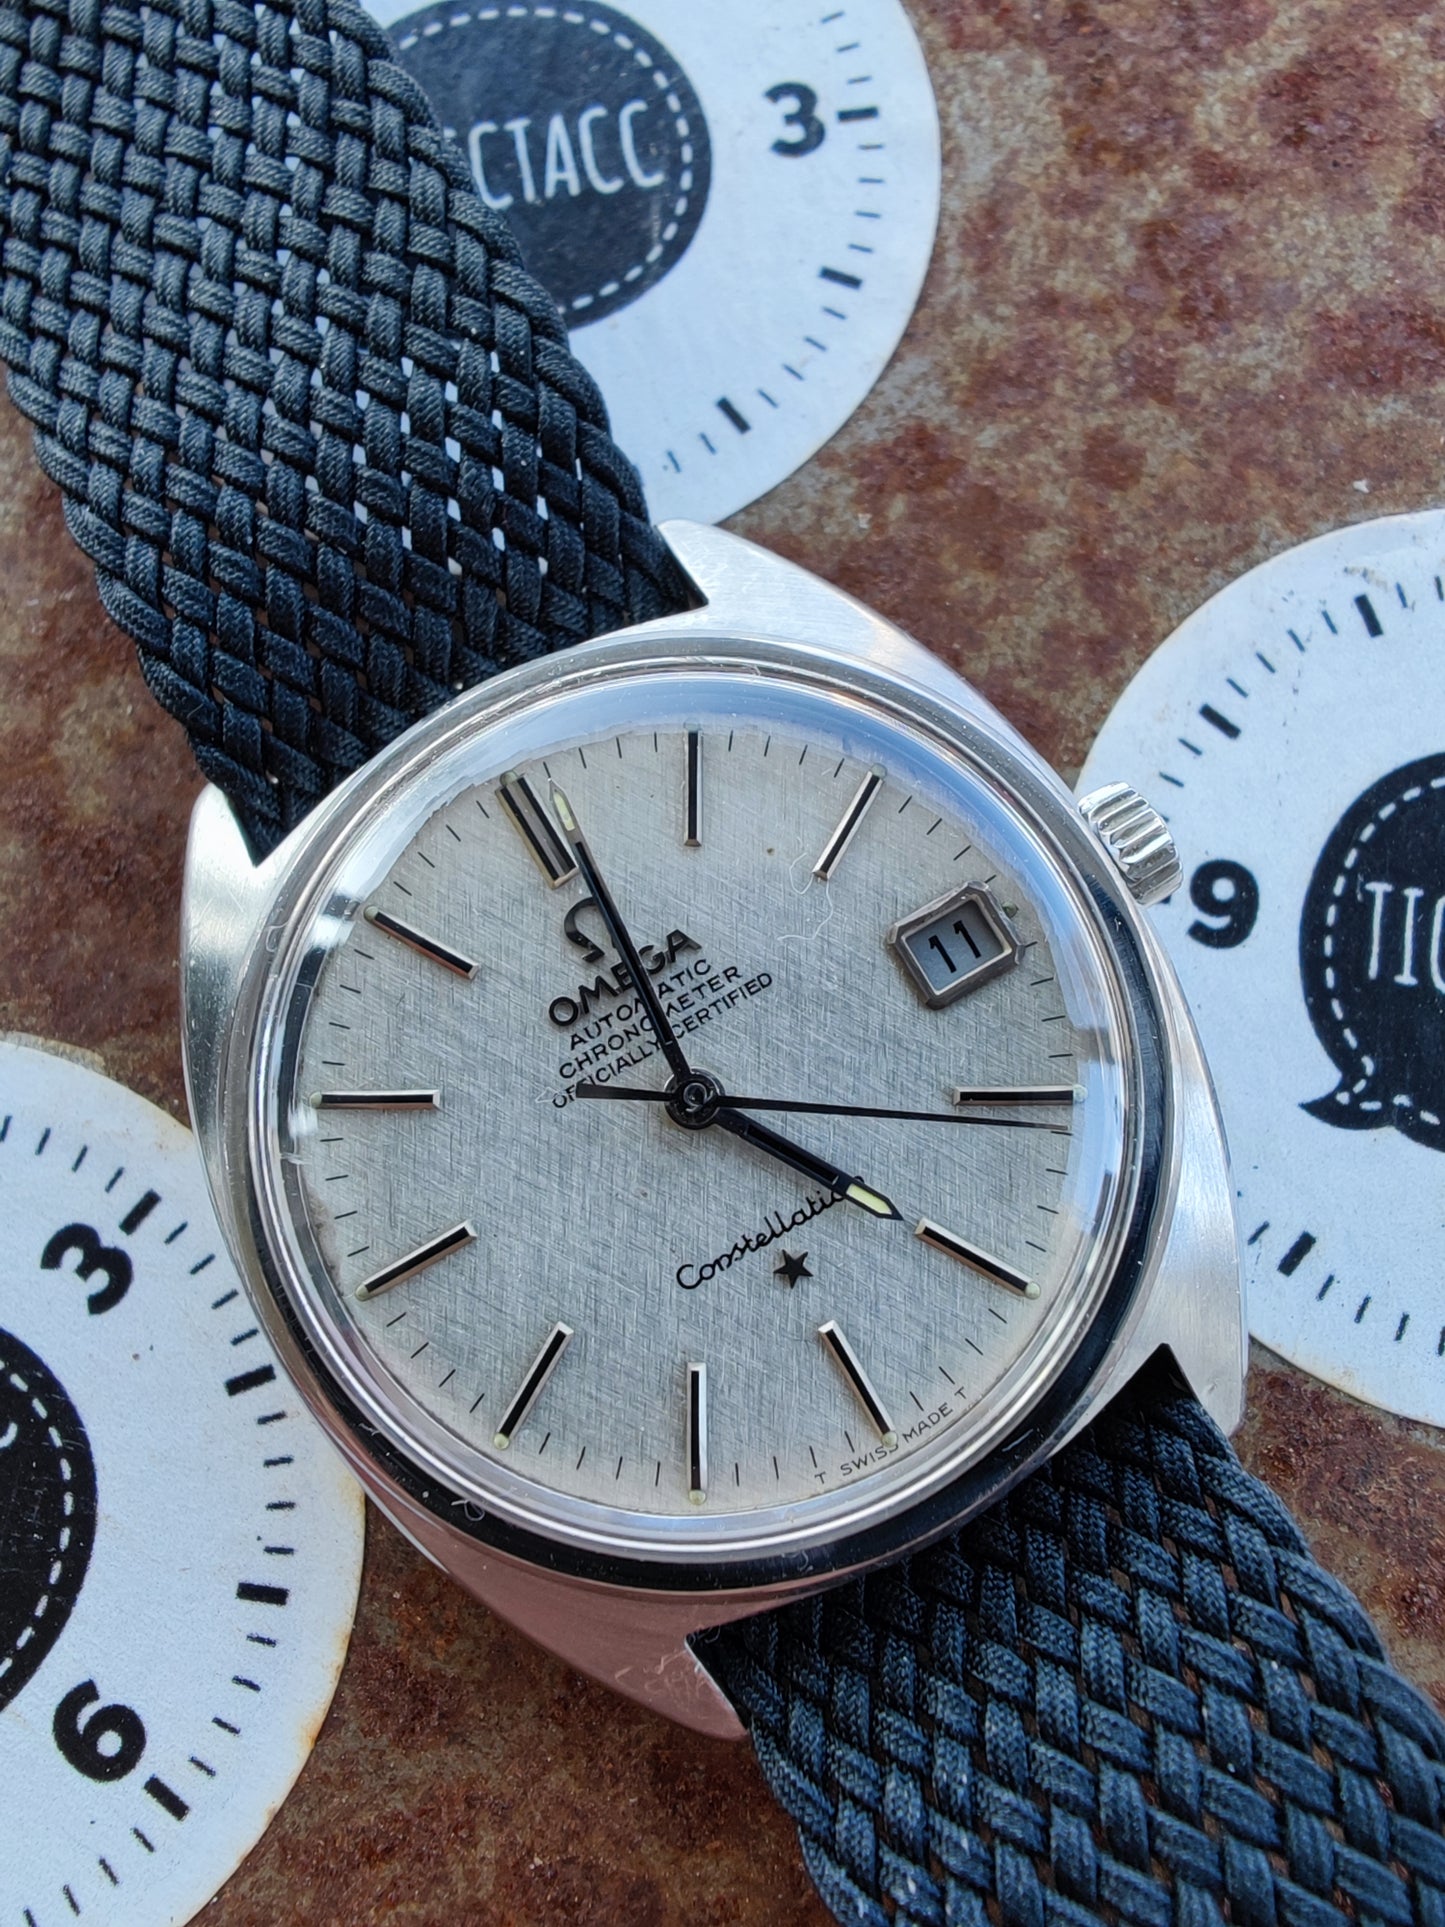 OMEGA Constellation Automatic  168.027 Linen Dial